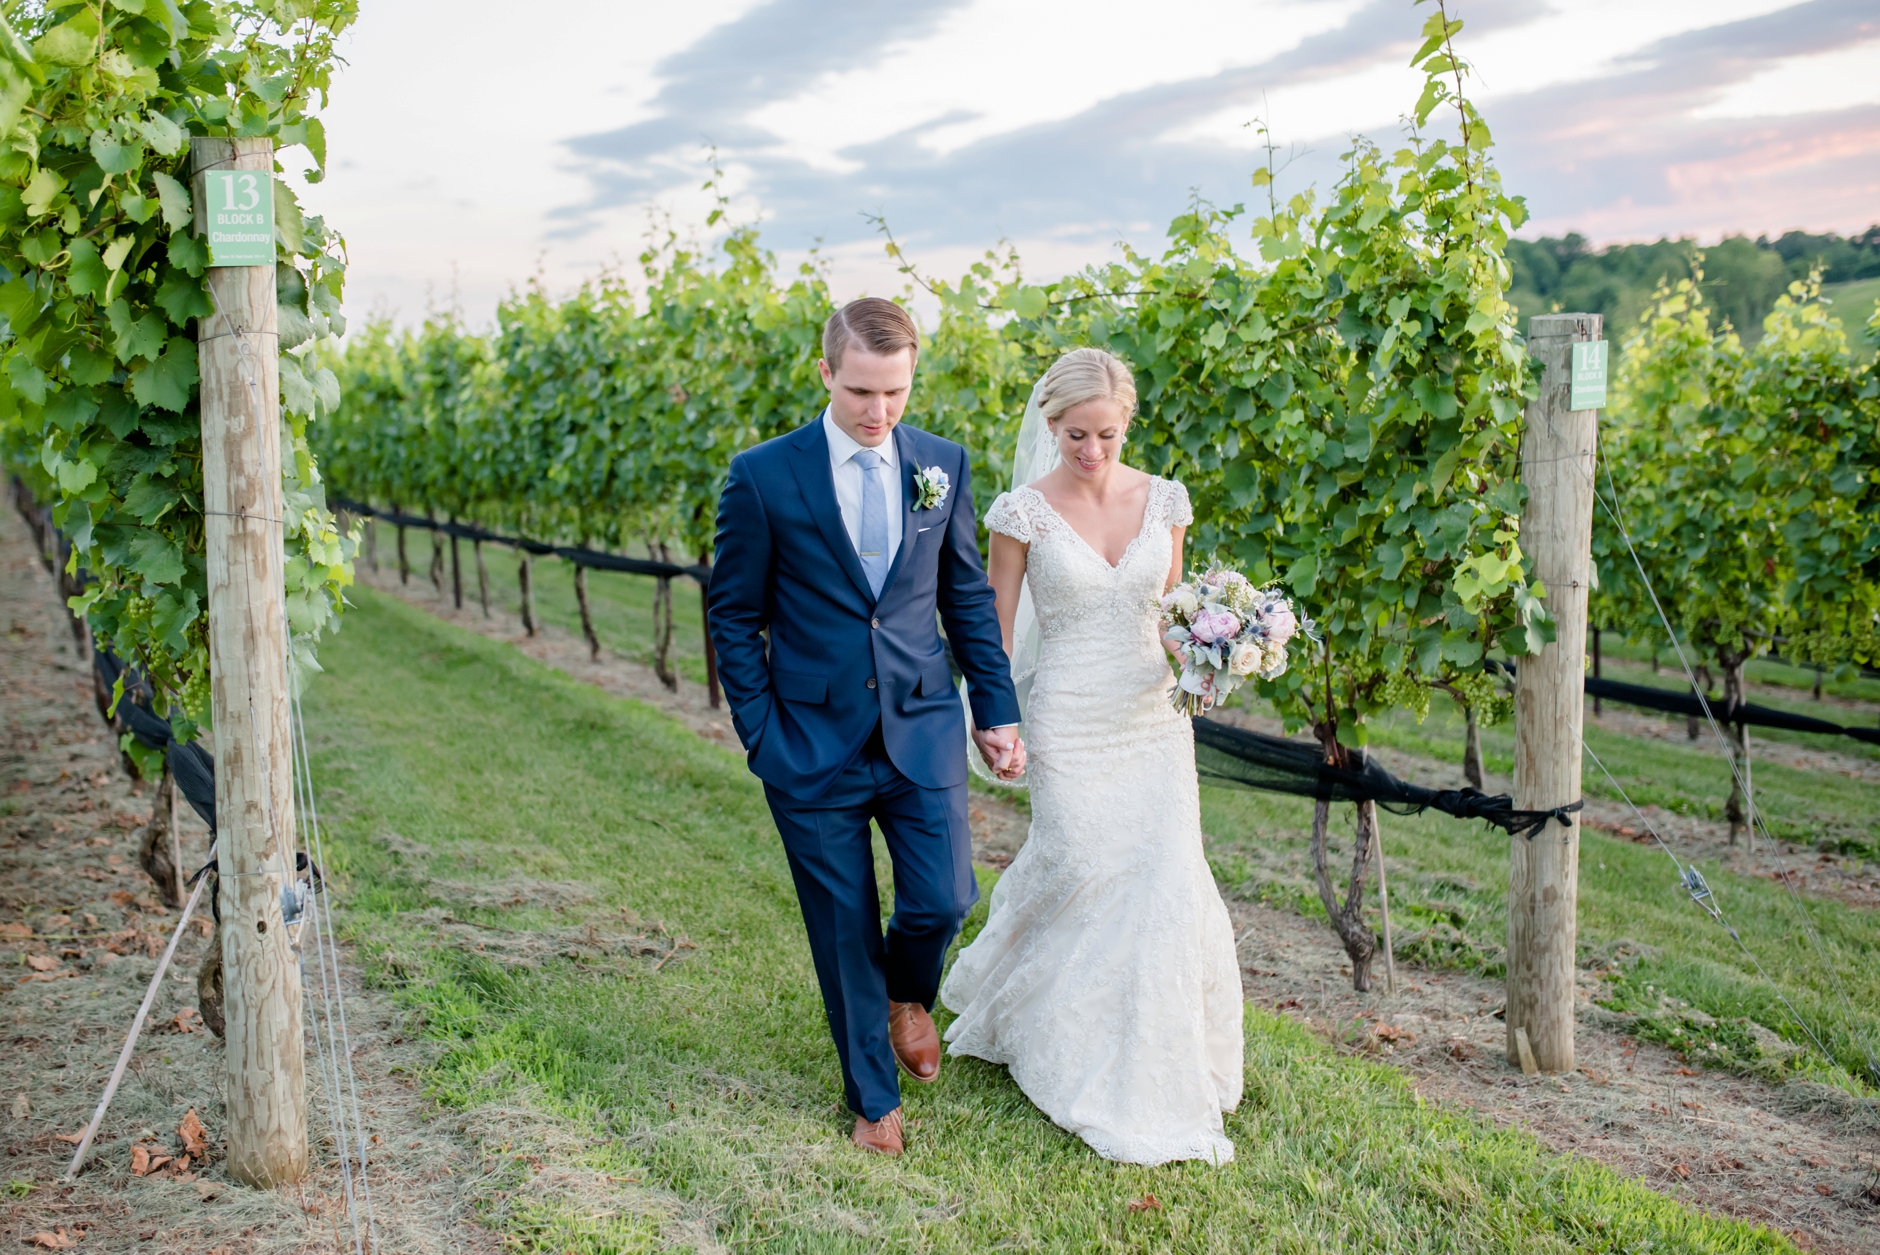 55A-Stone-Tower-Winery-Summer-Wedding-GG-1334